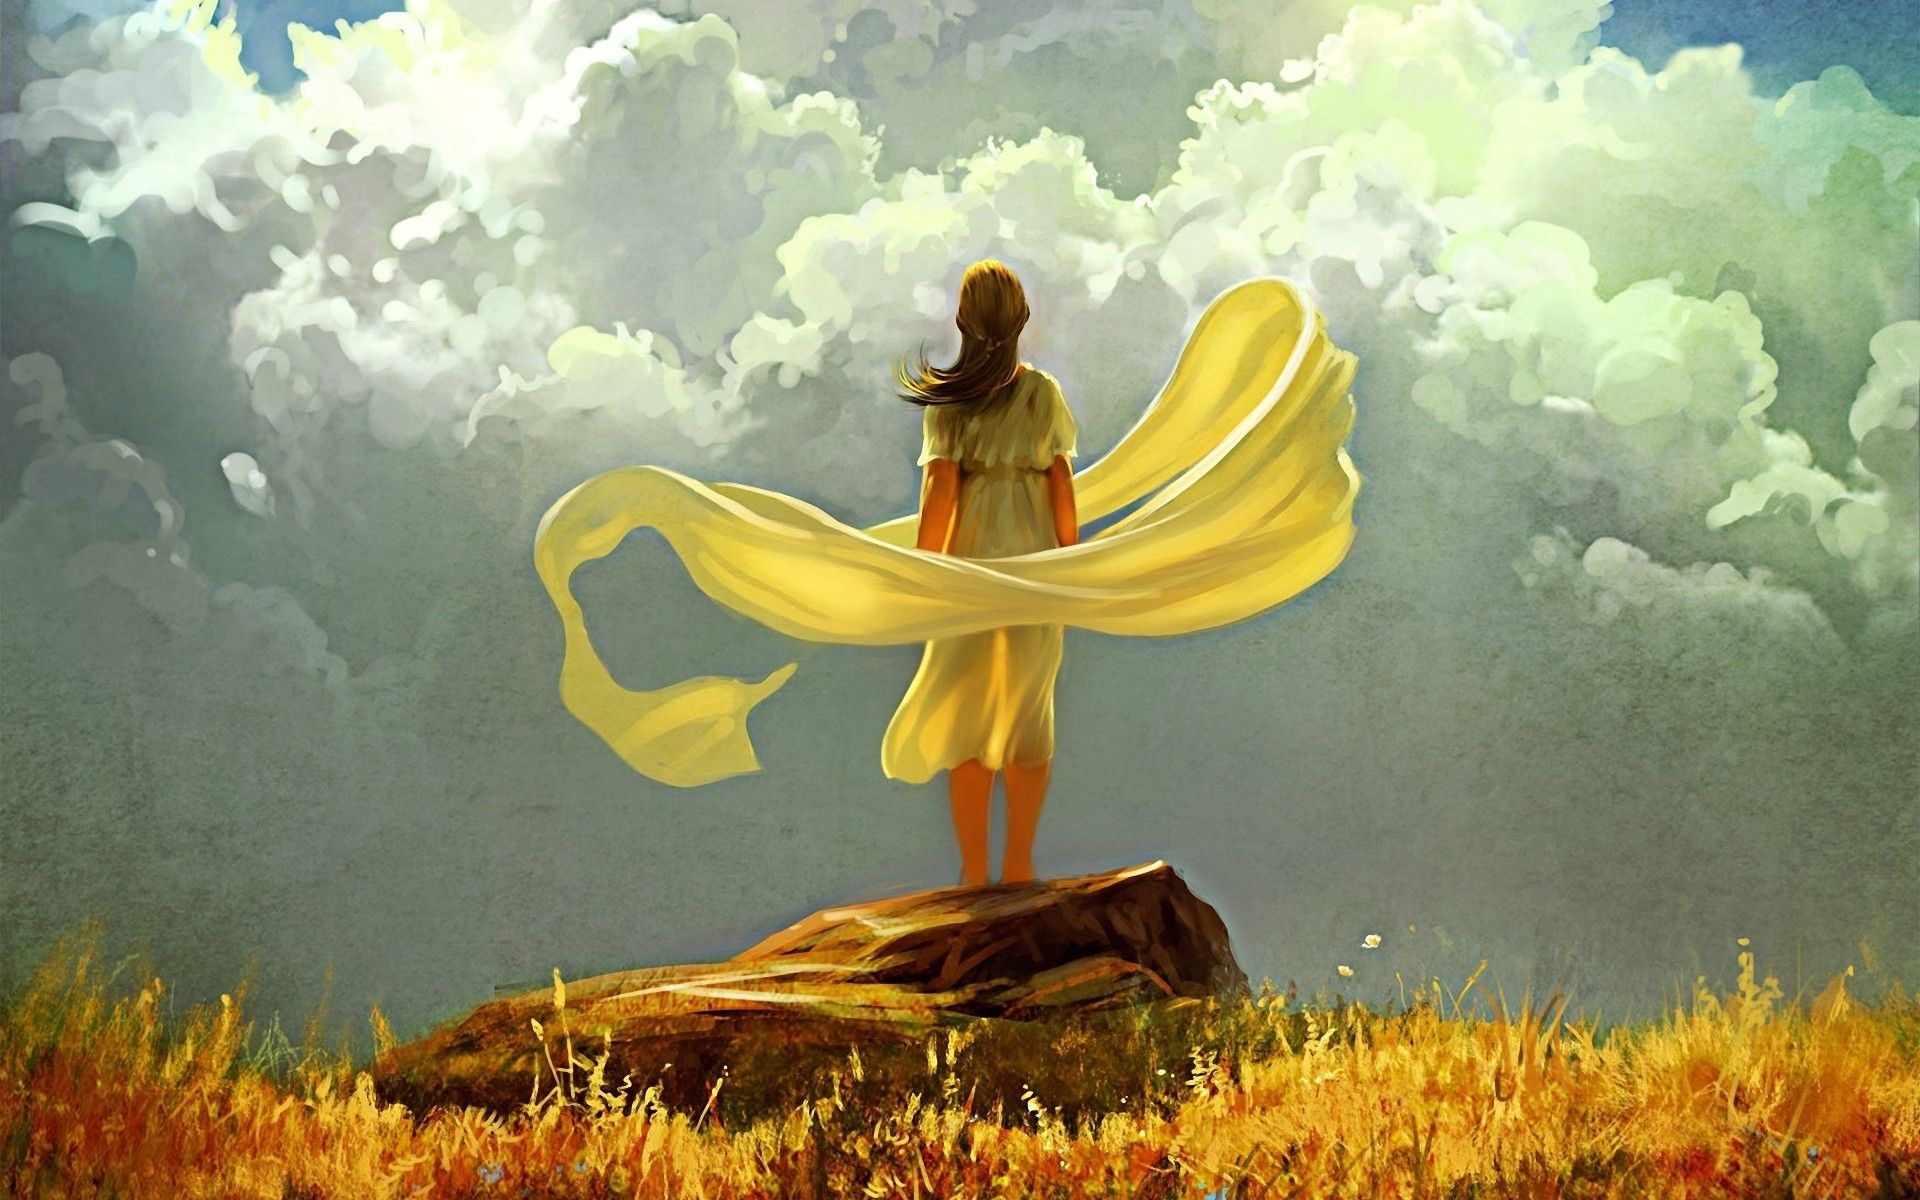 women, paintings, clouds, ribbons, sunlight, yellow dress :: Wallpapers.